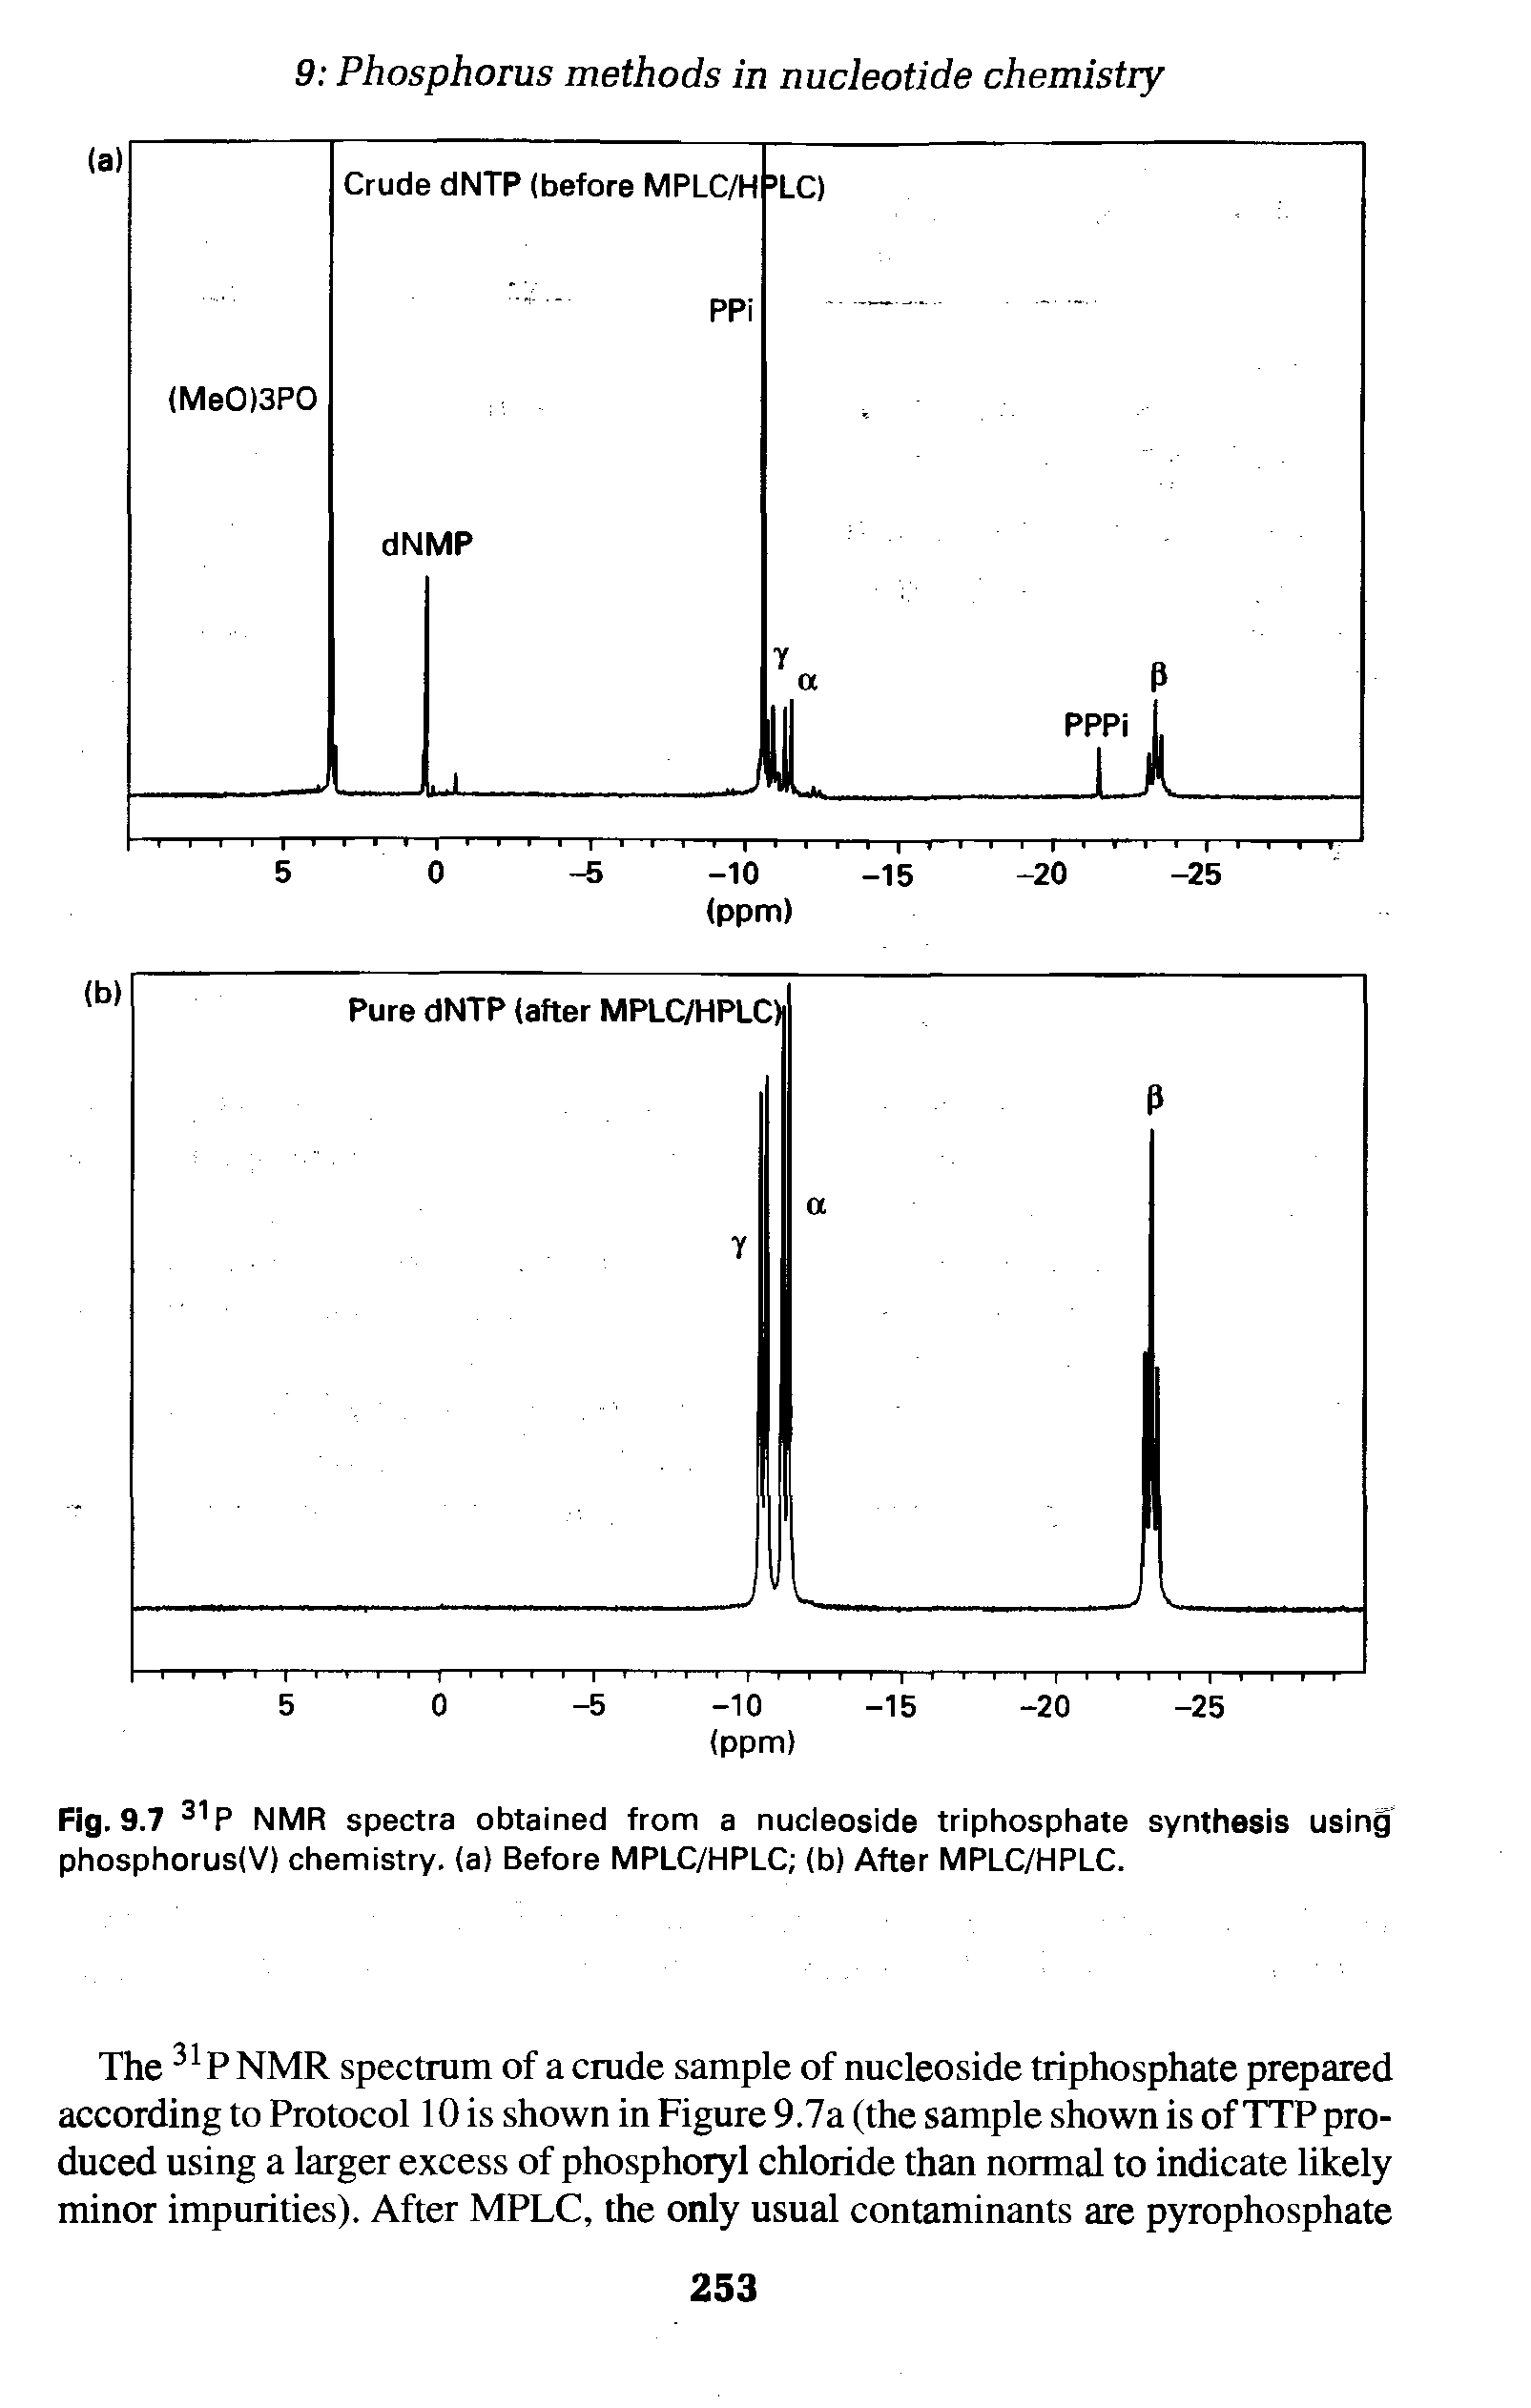 Fig. 9.7 31P NMR spectra obtained from a nucleoside triphosphate synthesis using phosphorus(V) chemistry, (a) Before MPLC/HPLC (b) After MPLC/HPLC.